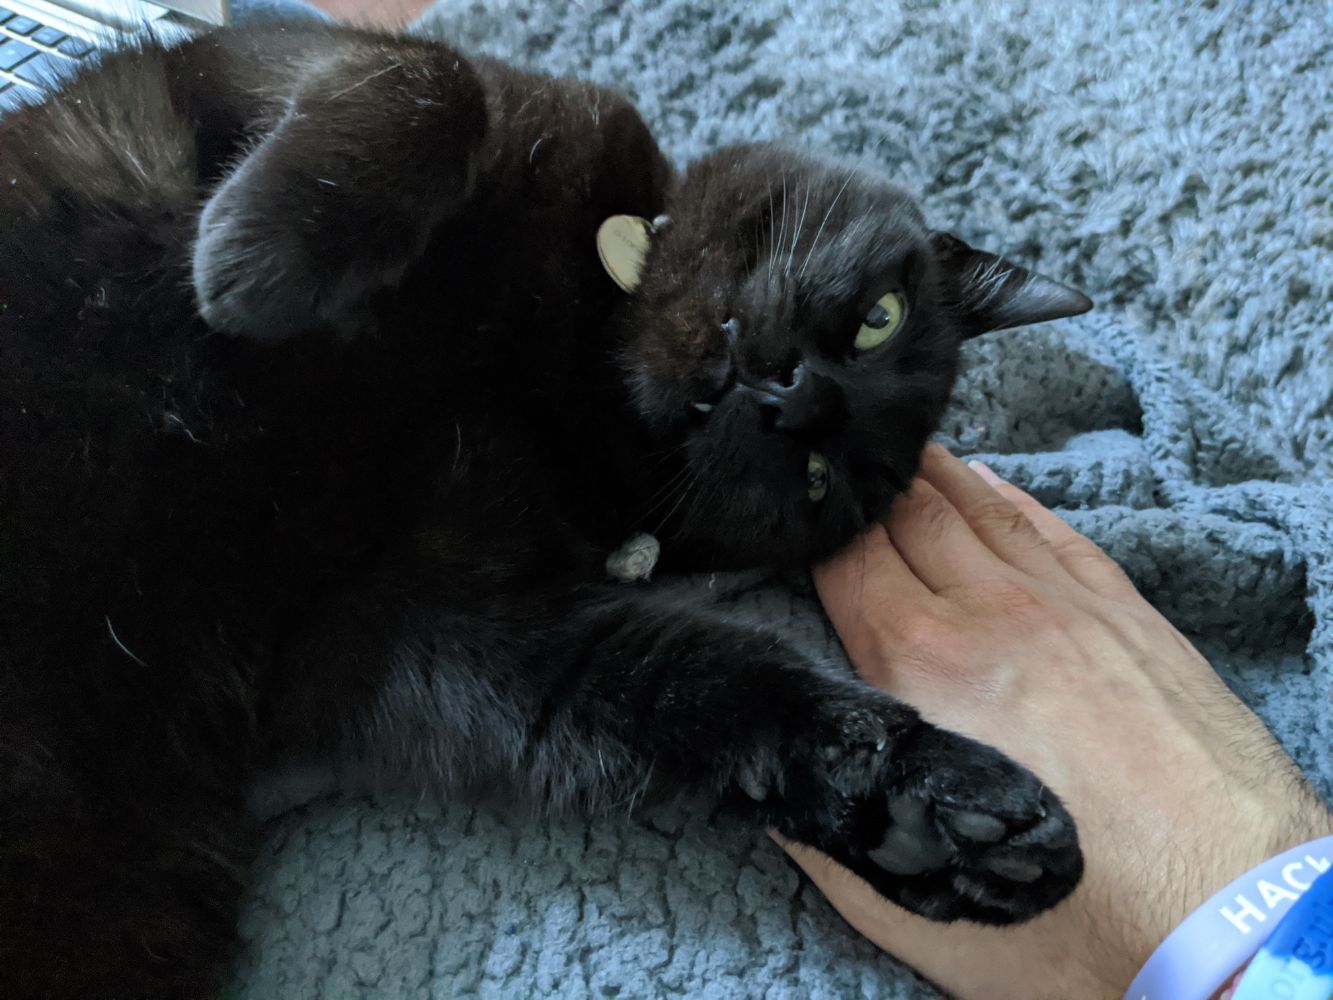 Black cat lying on his side, his head on Jamie's hand, with his little toofies showing